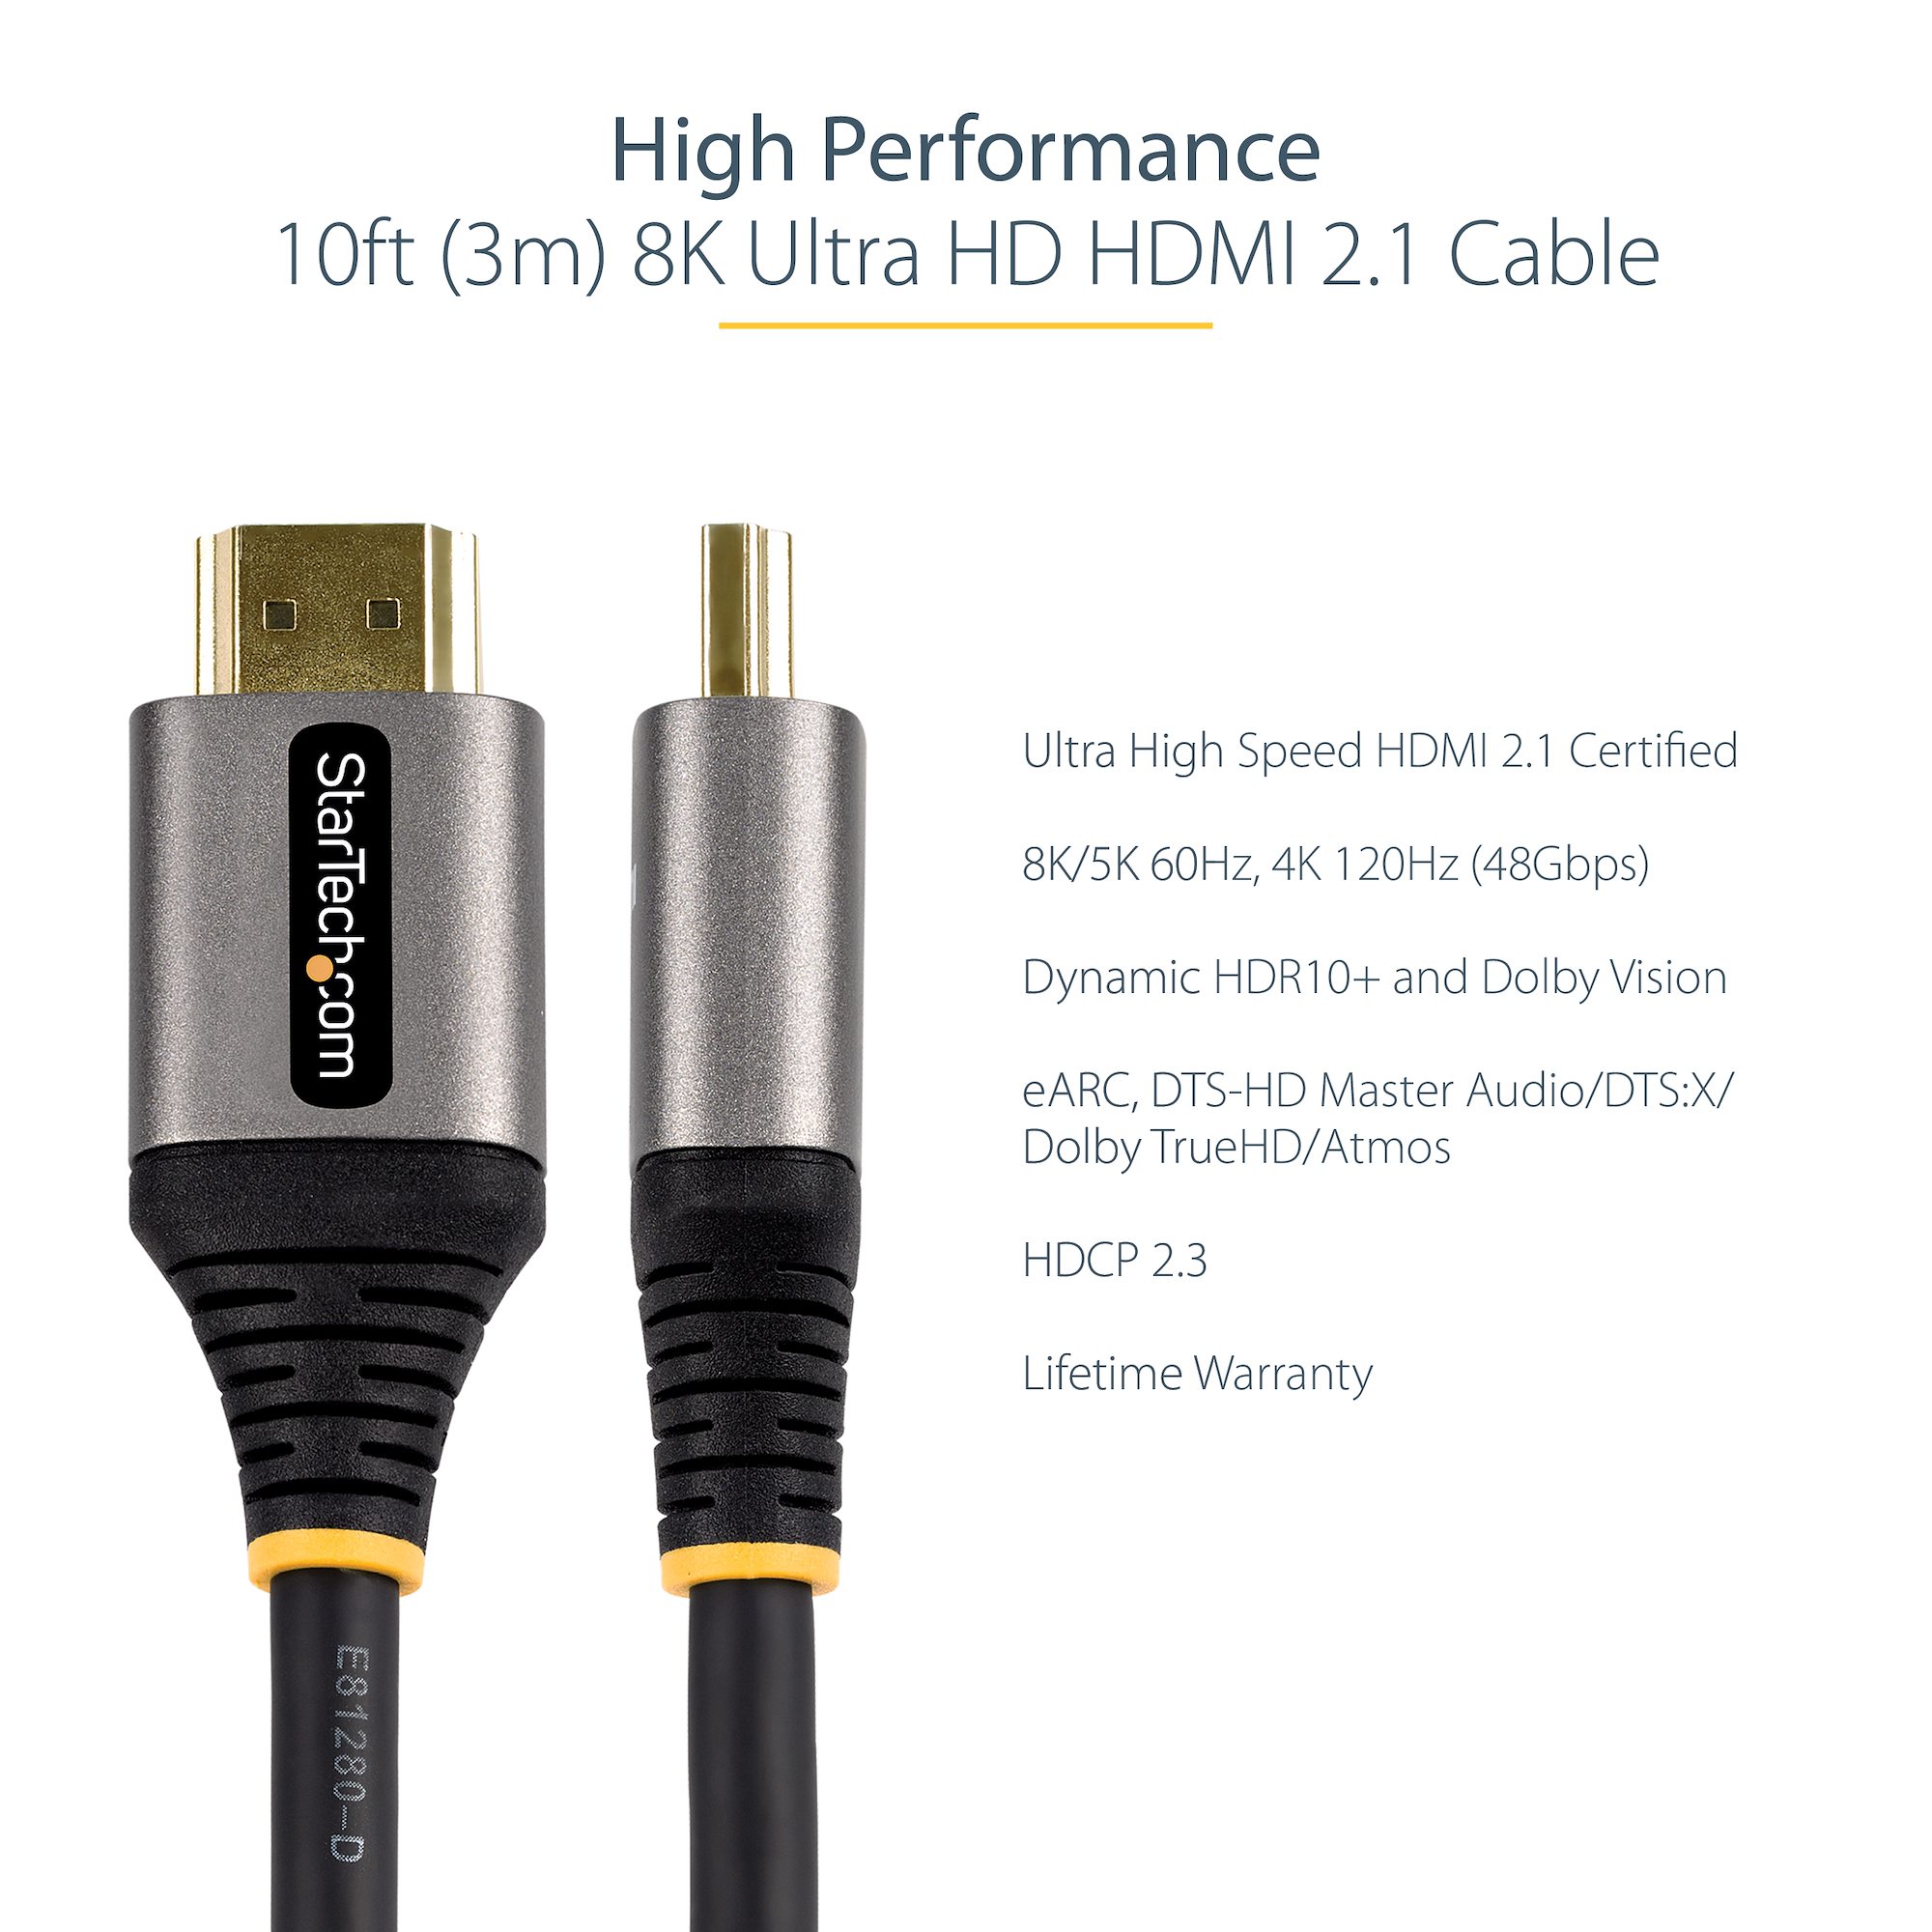 10ft 3m Certified 2.1 Cable - - HDMI® Cables & HDMI | StarTech.com